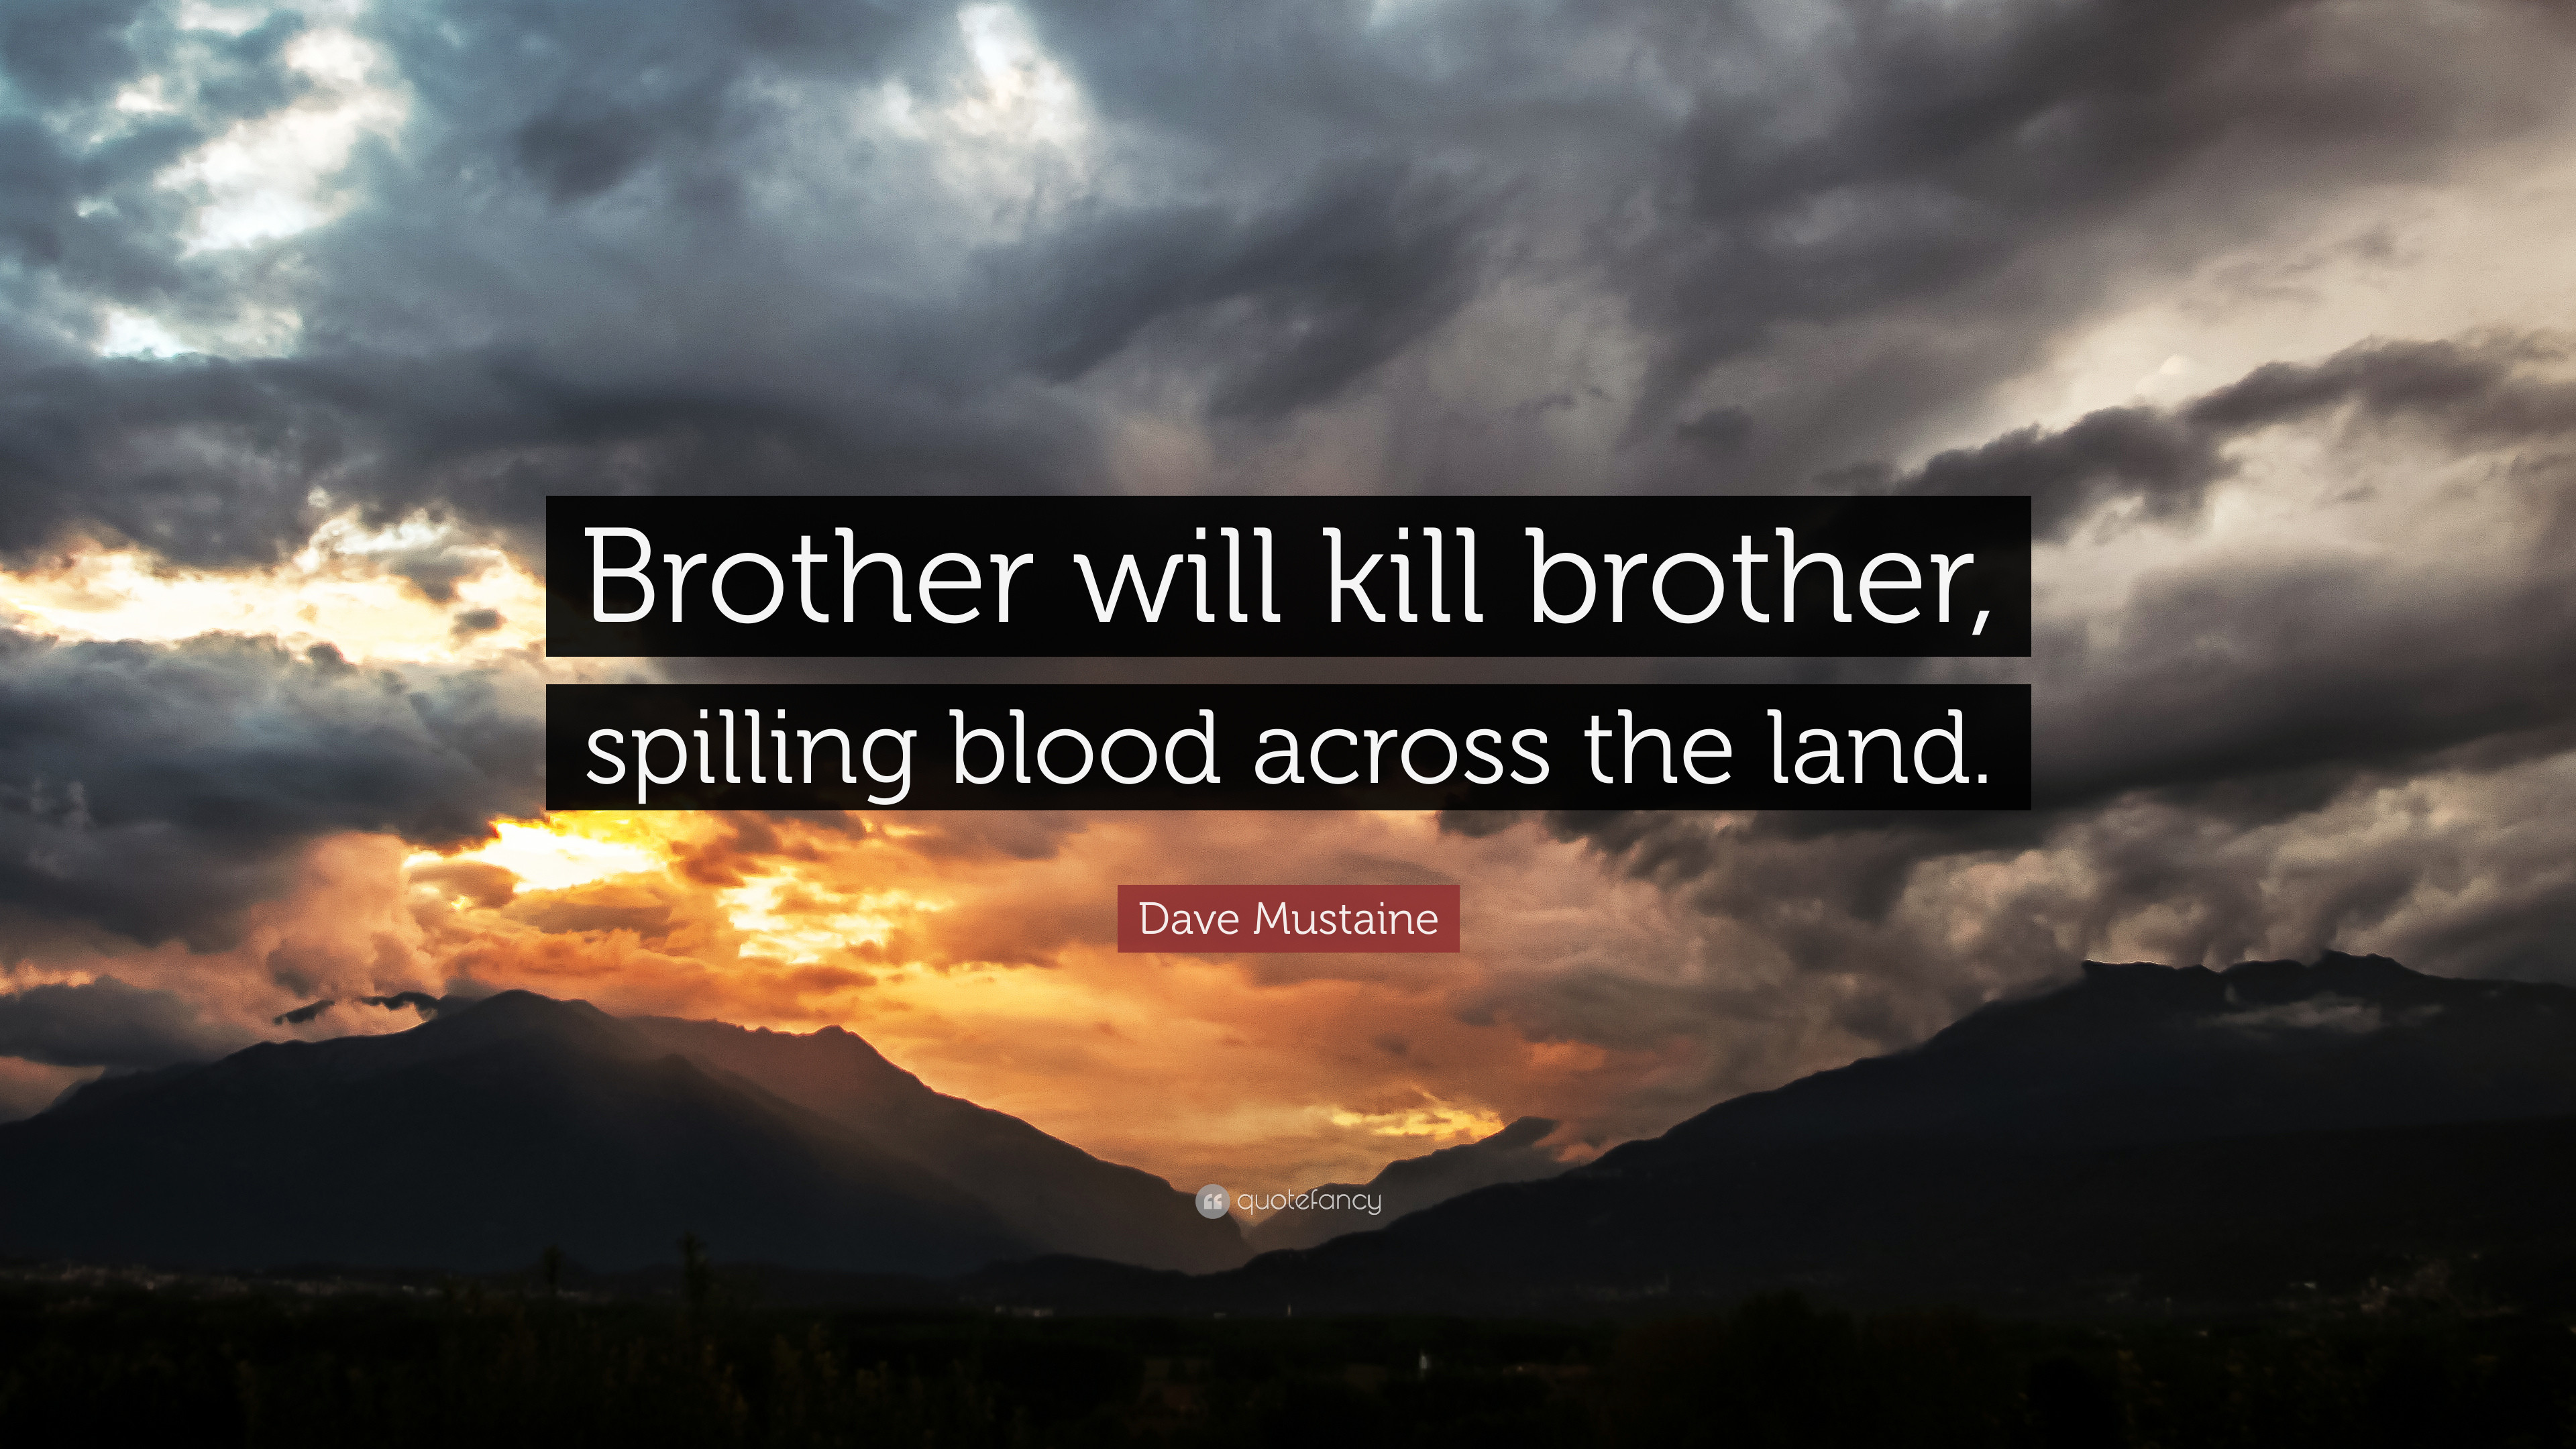 3840x2160 Dave Mustaine Quote: “Brother will kill brother, spilling blood across the  land.